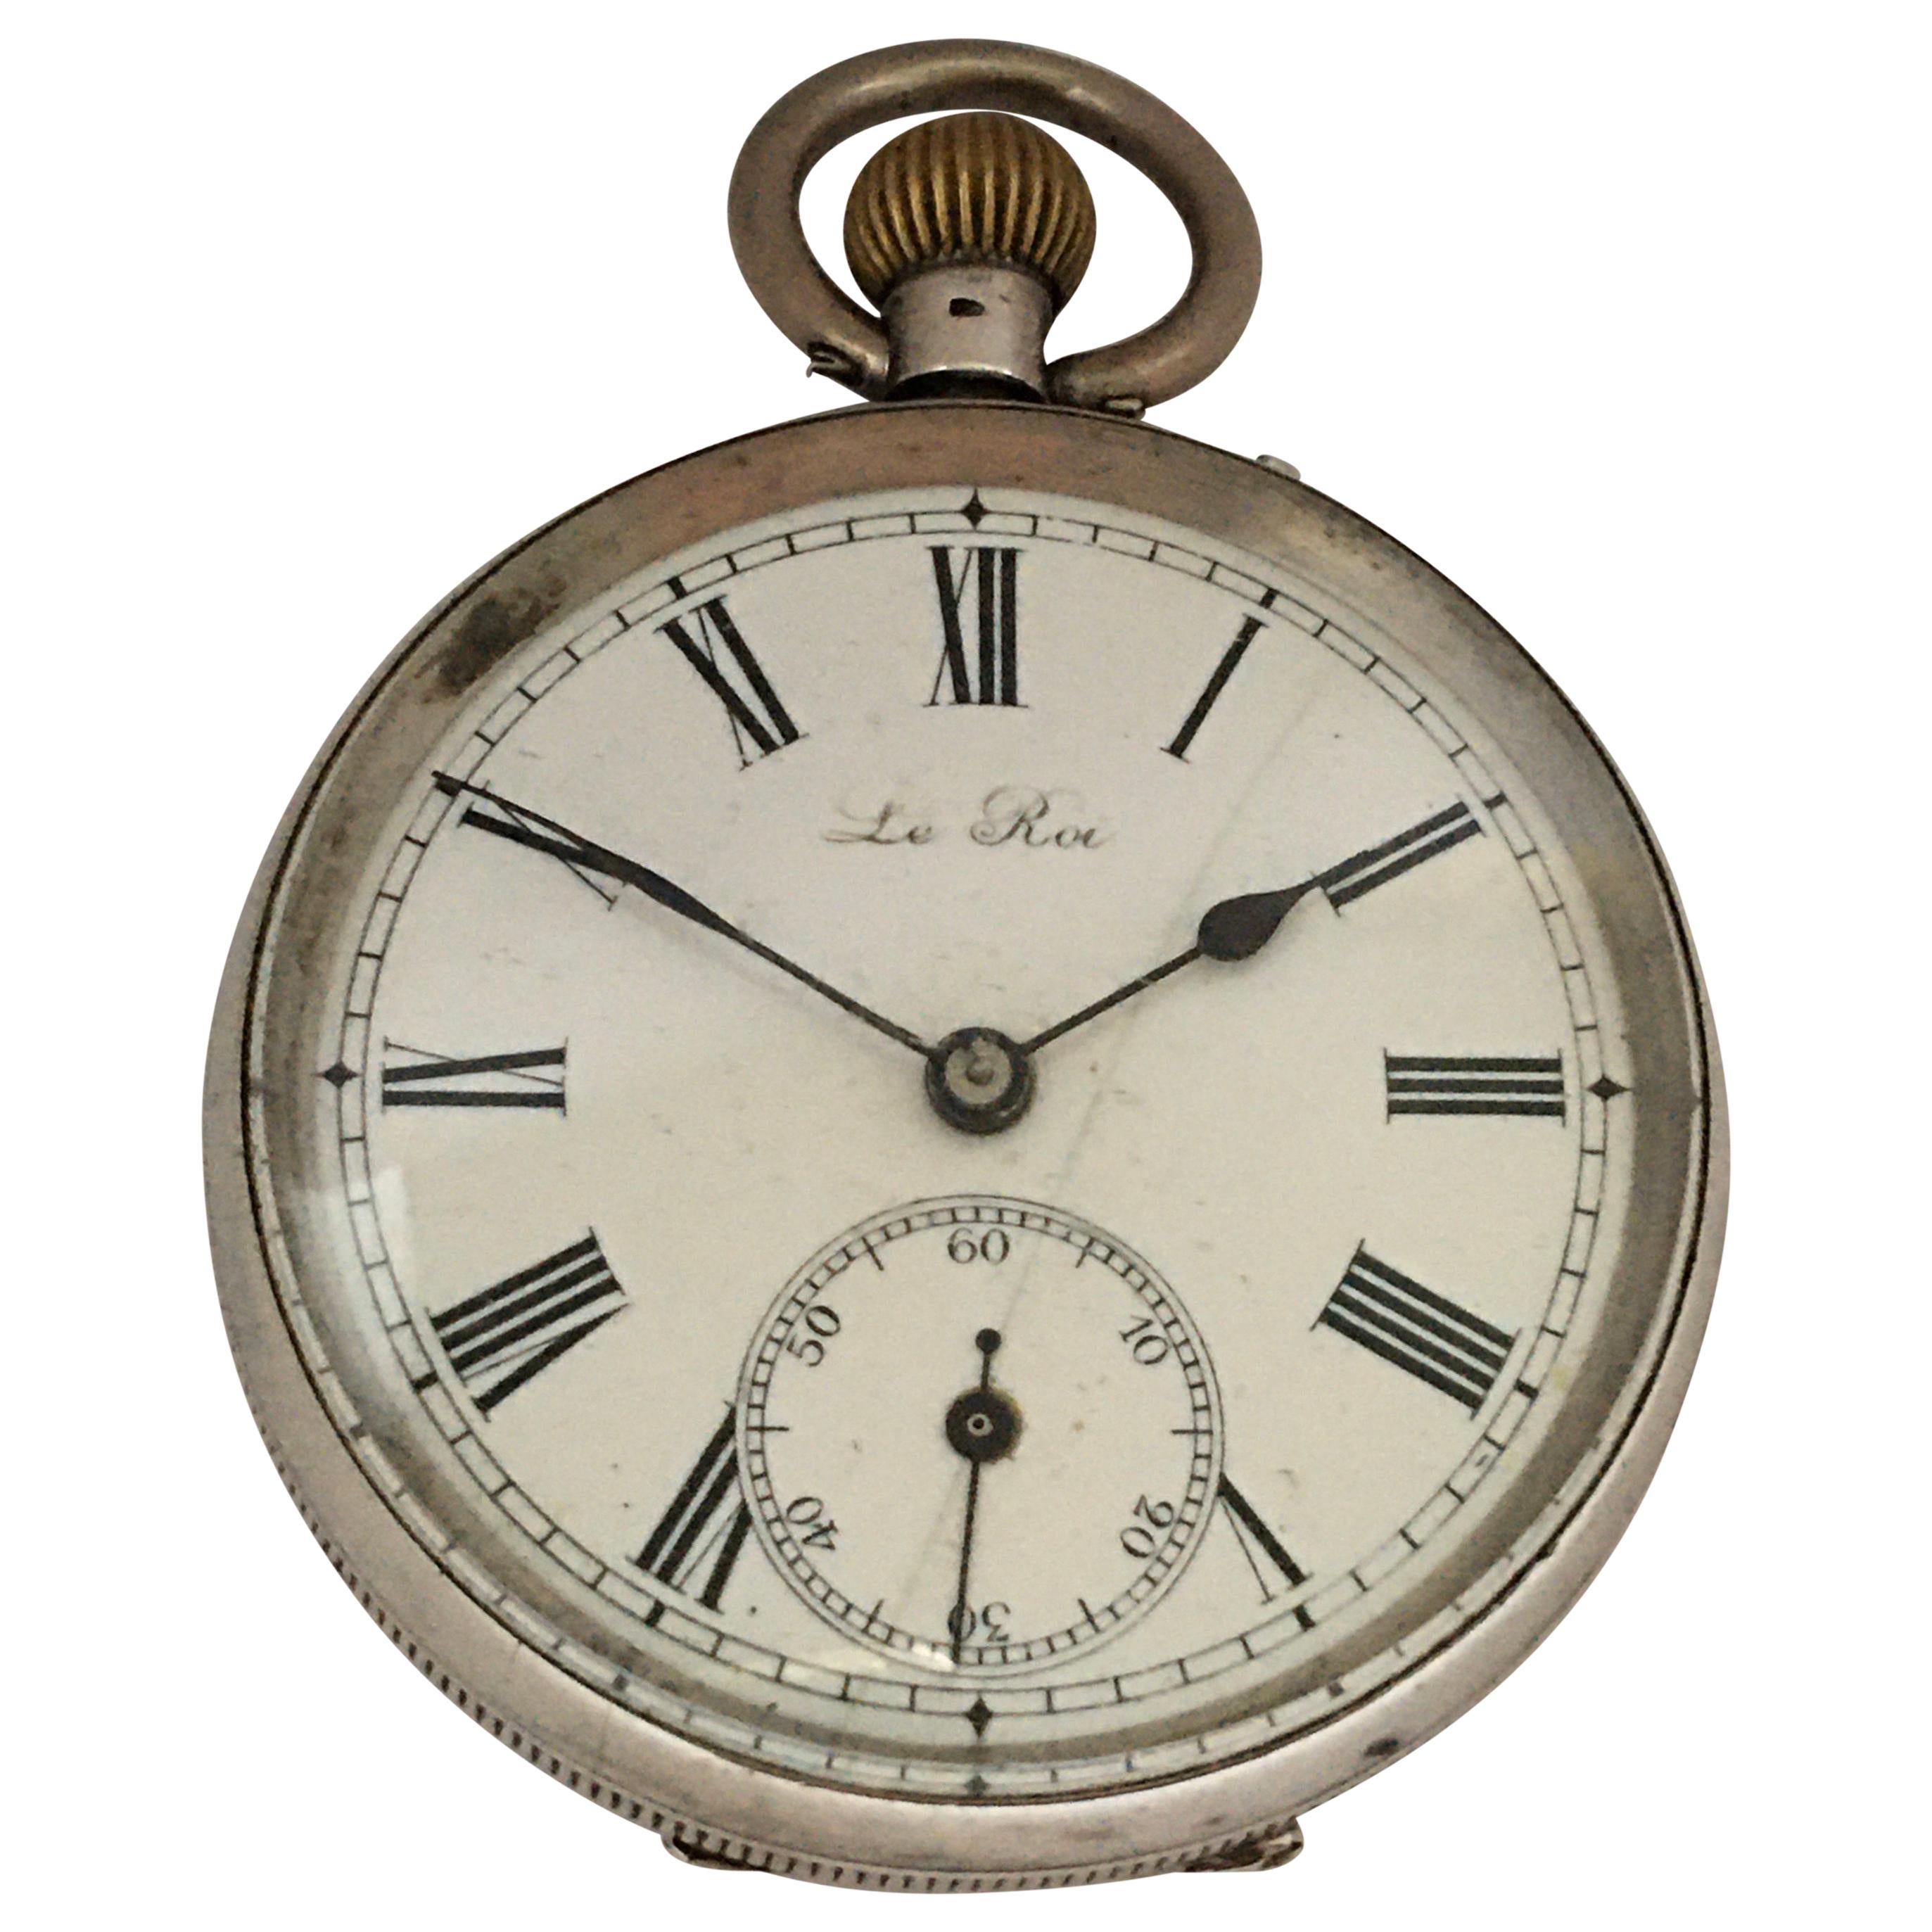 Antique Silver Pocket Watch Signed Le Roi For Sale